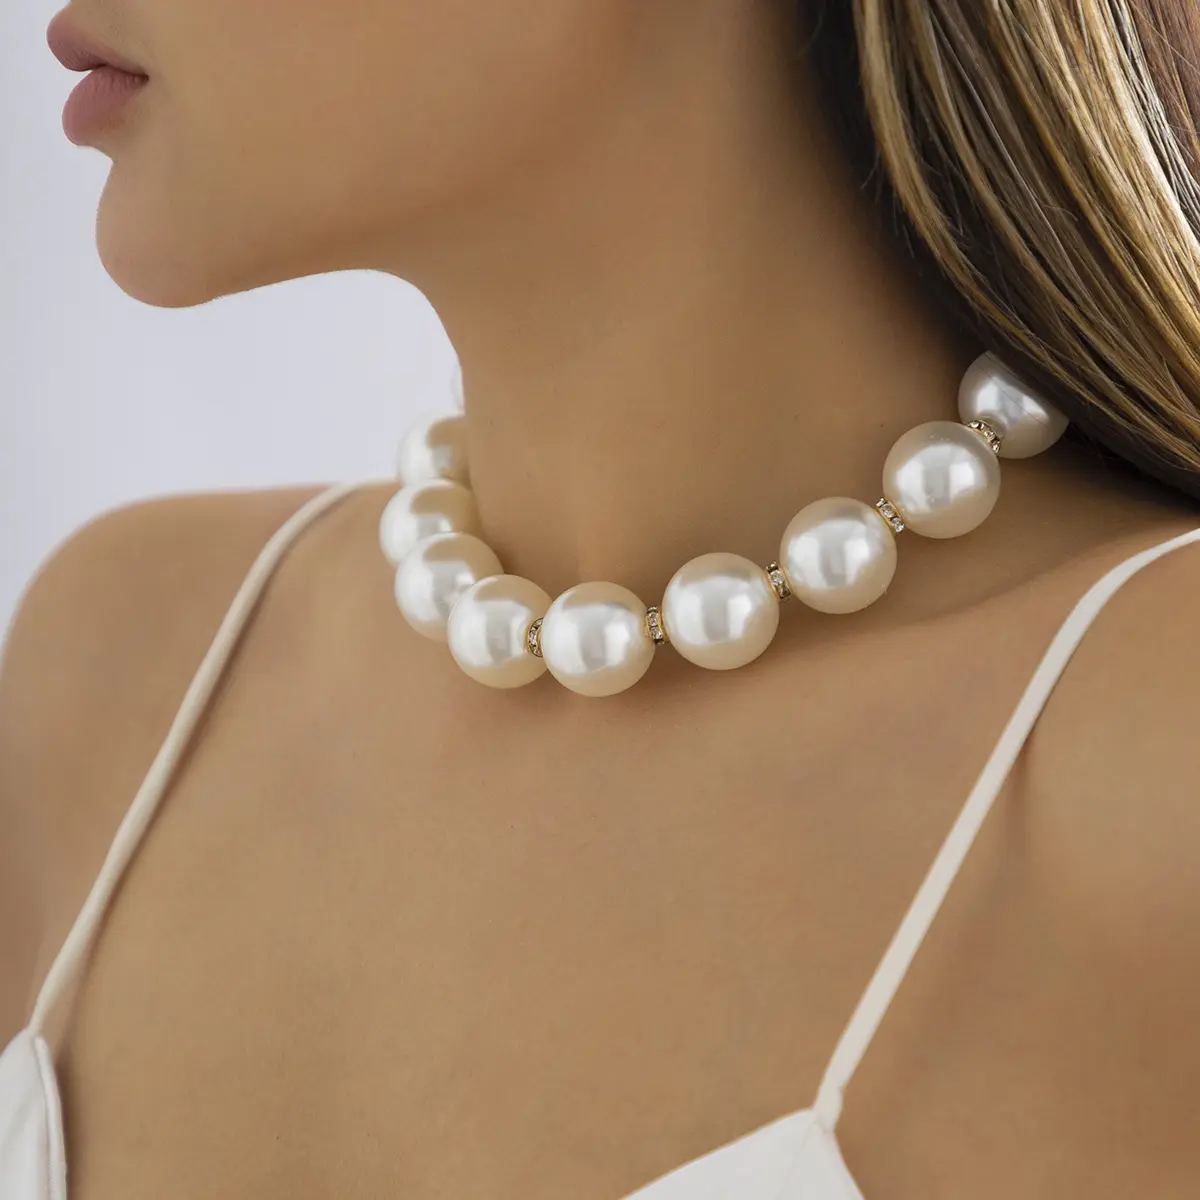 Baroque Big Pearl Necklace Freshwater Pearl Choker Rhinestone Bead Necklace Bridal Wedding Jewelry Accessories